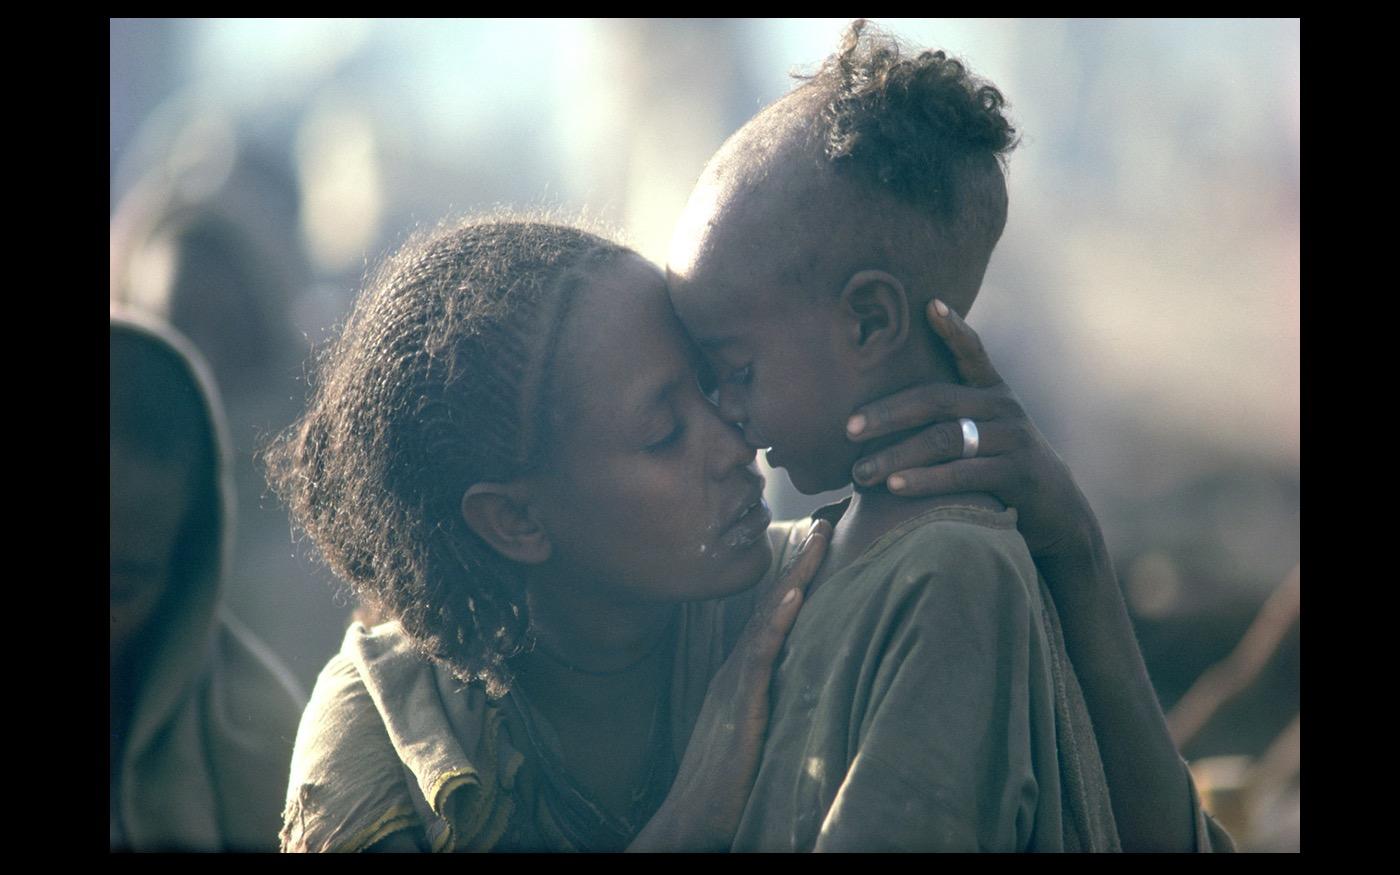 Even in a wretched refugee camp, a mother's love is present.  Ethiopia  1984 : Looking Back: 60 Years of Photographs : David Burnett | Photographer